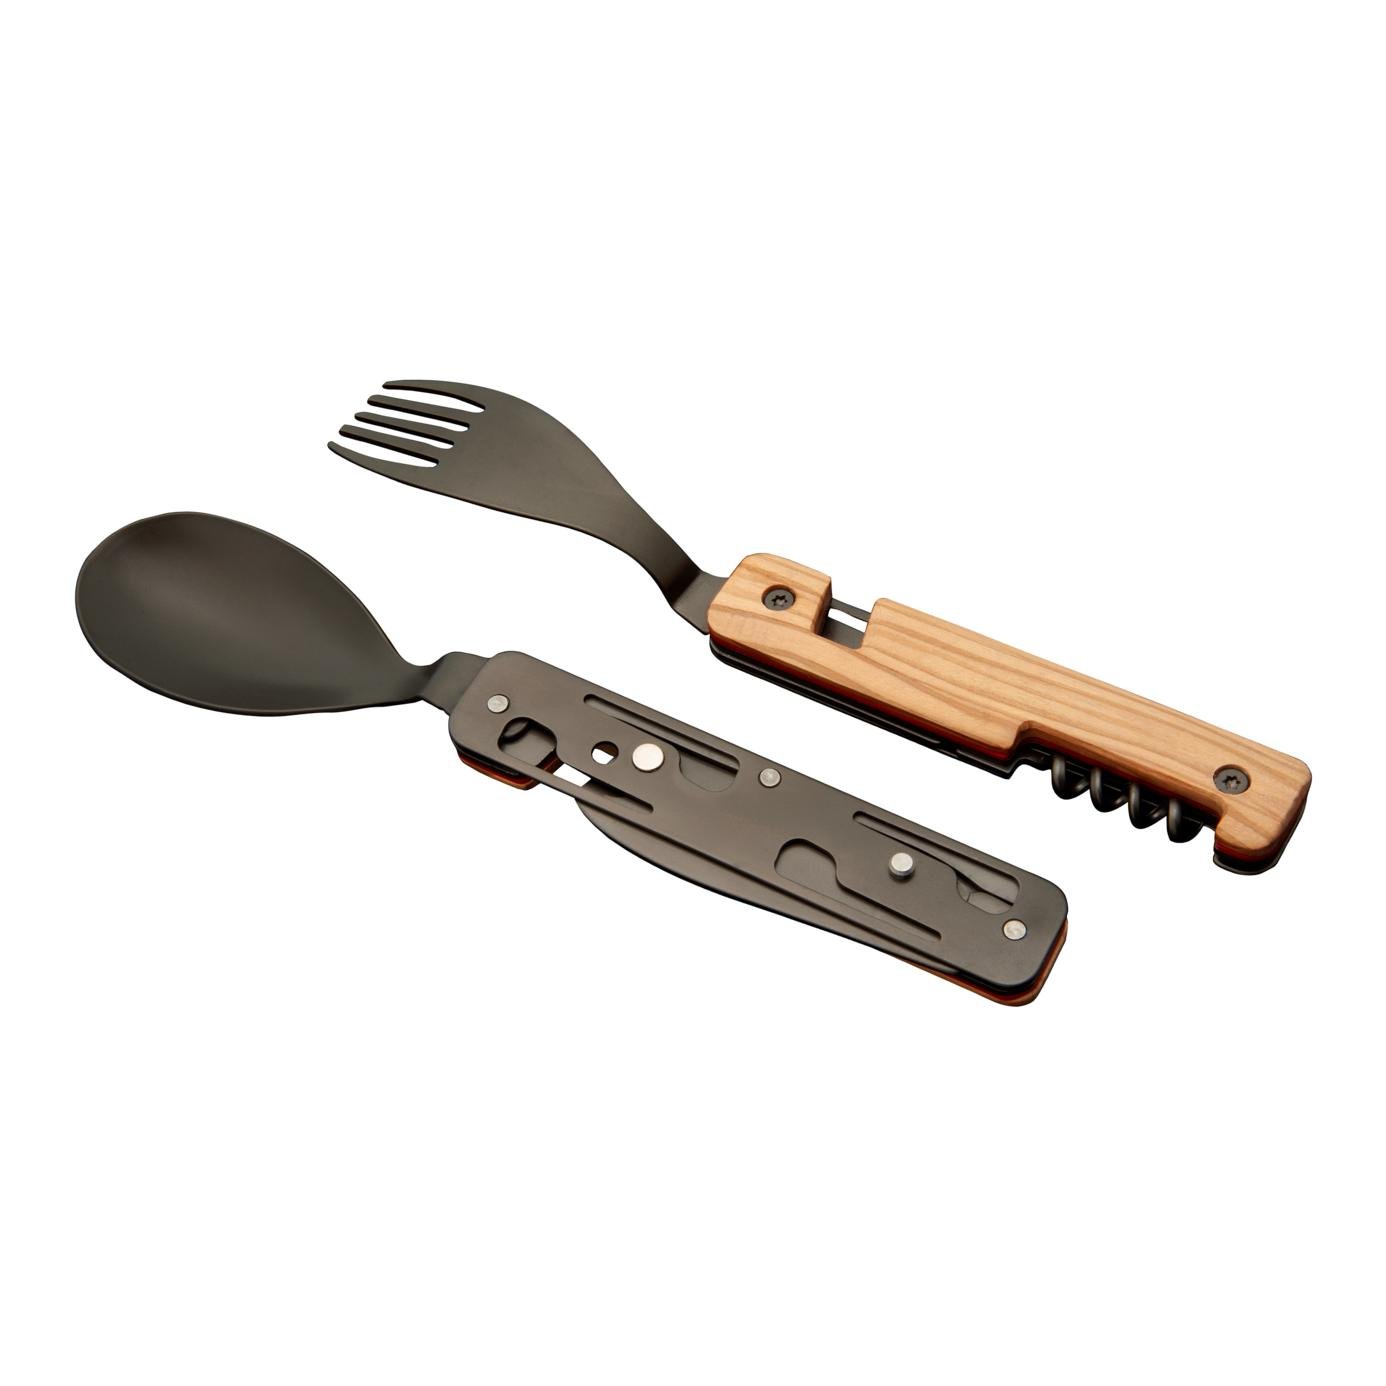 Image of Akinod Multifunctional Cutlery 13h25, Titan - Olivenholz - bei fischen.ch